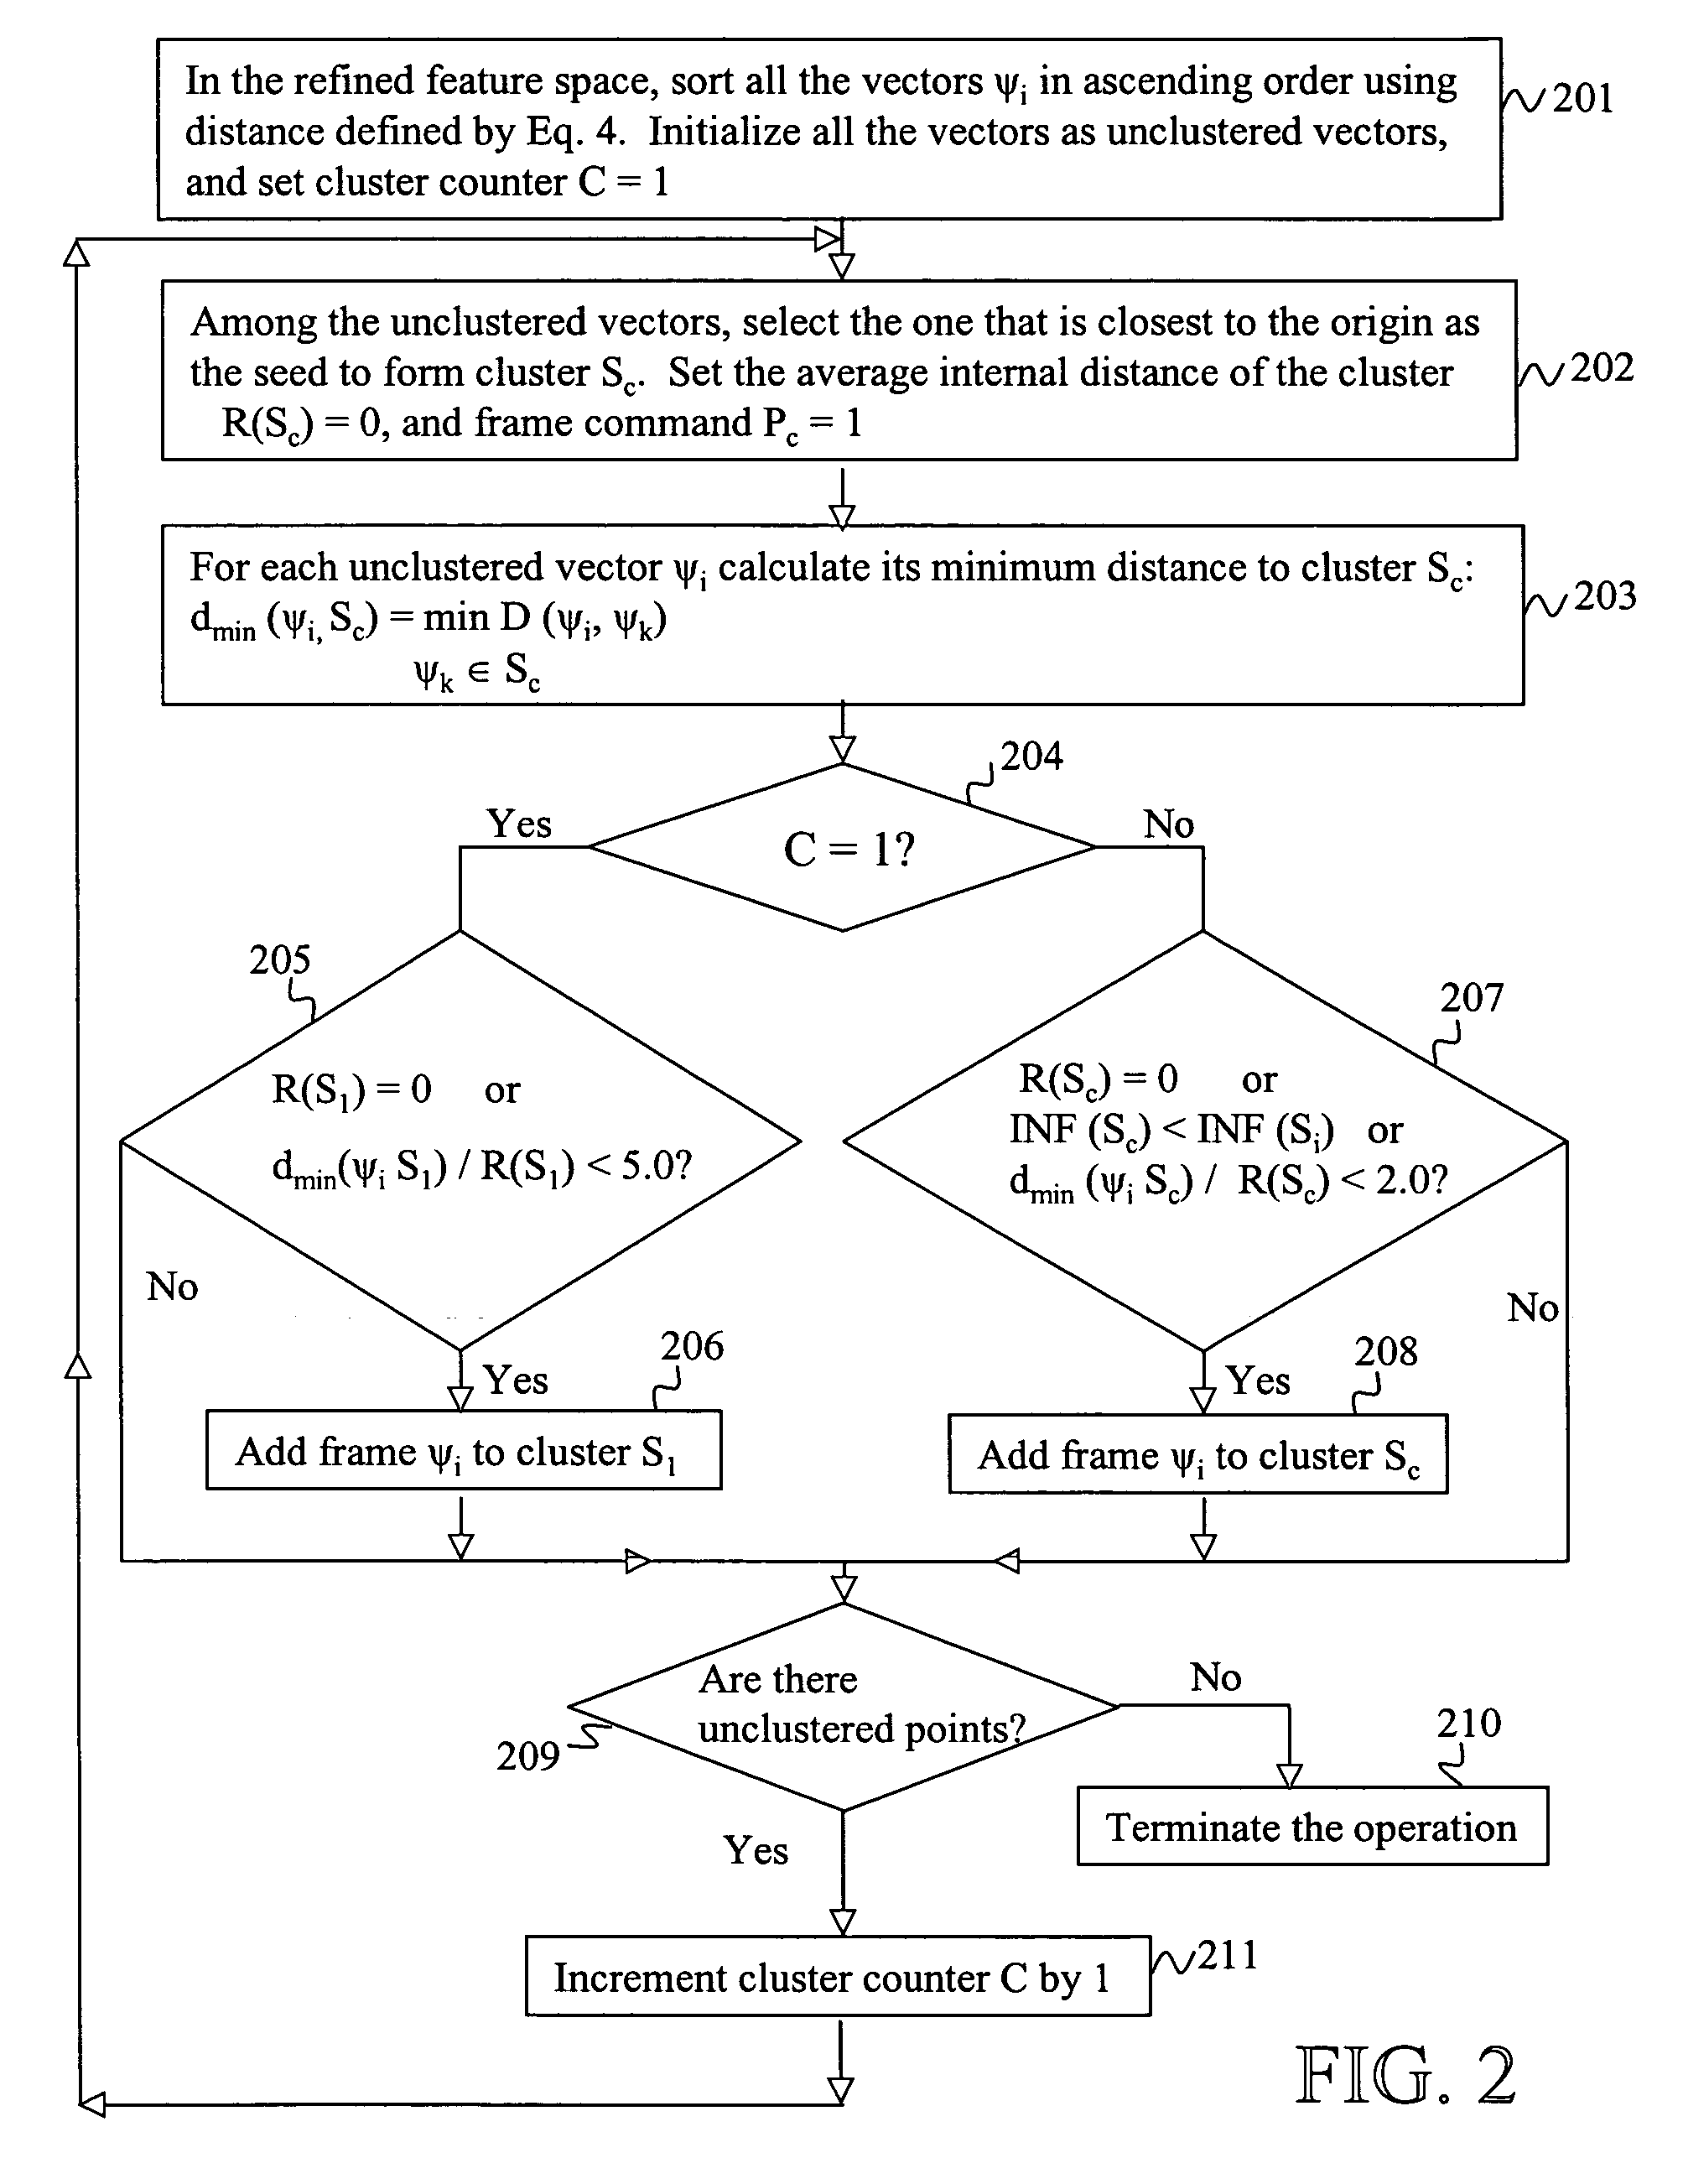 Method and system for segmentation, classification, and summarization of video images